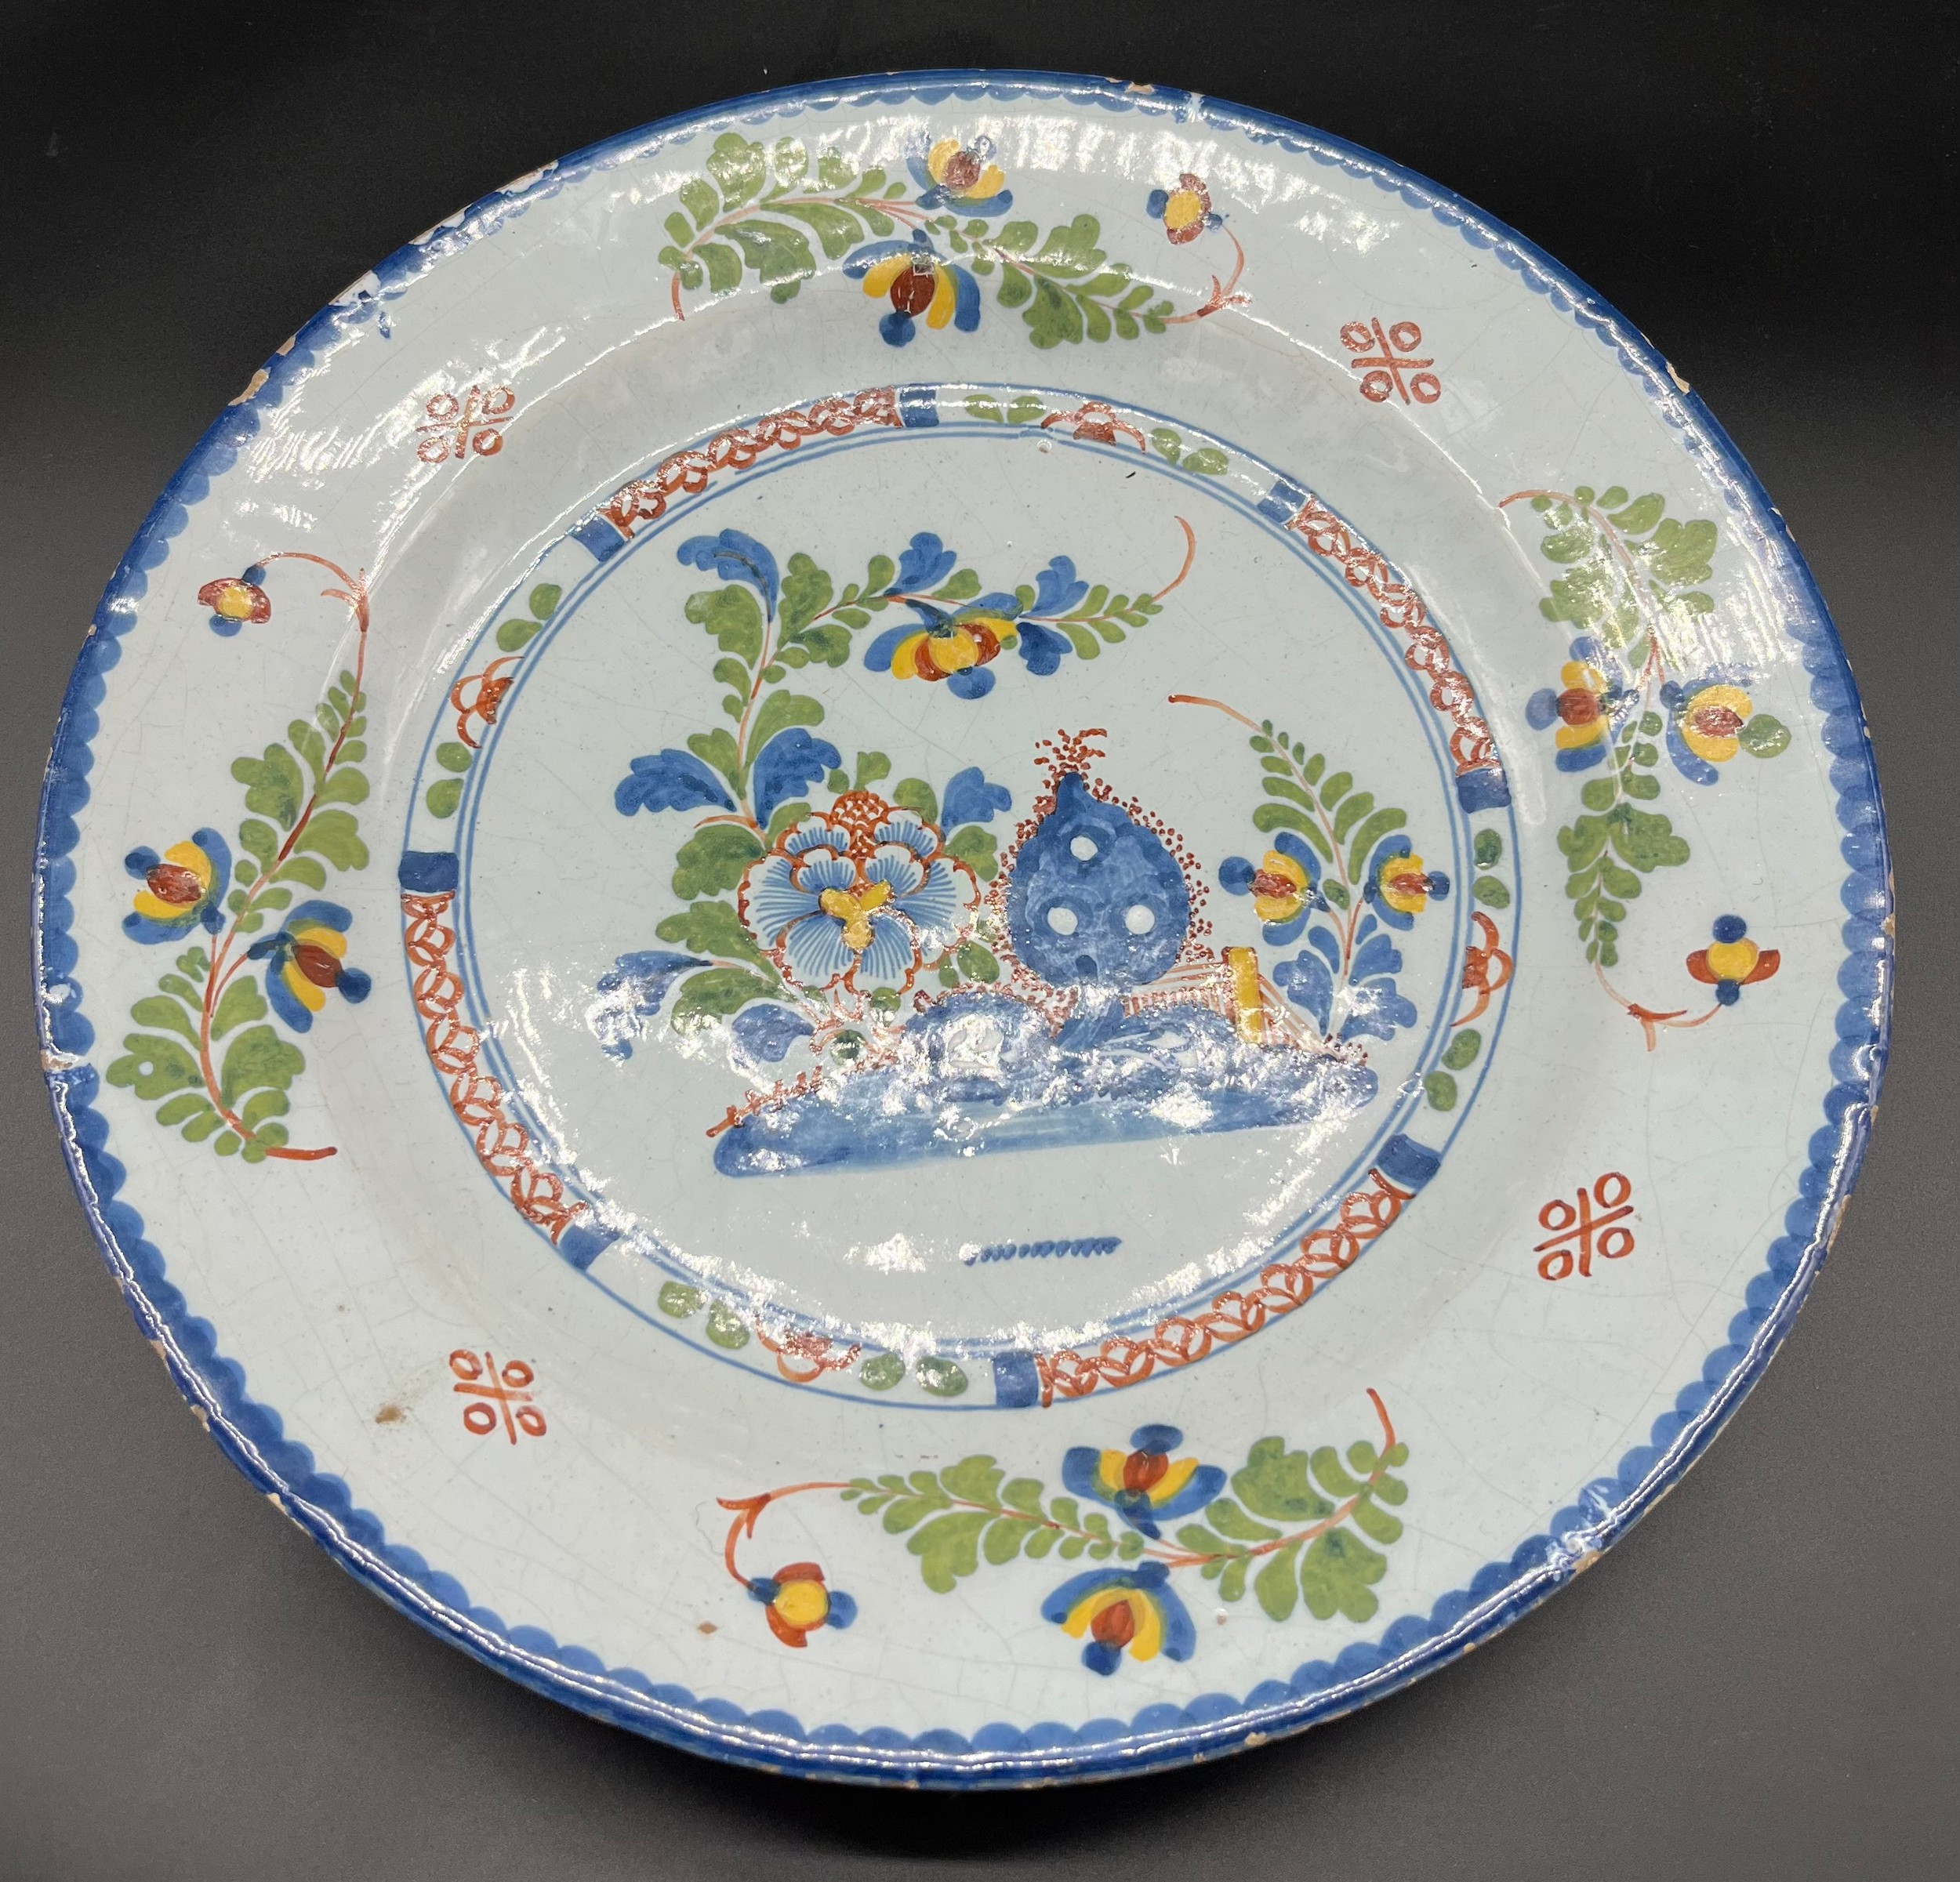 18th century delft hand painted wall charger bowl/ plate. Decorated with foliage/ flowers and ornate